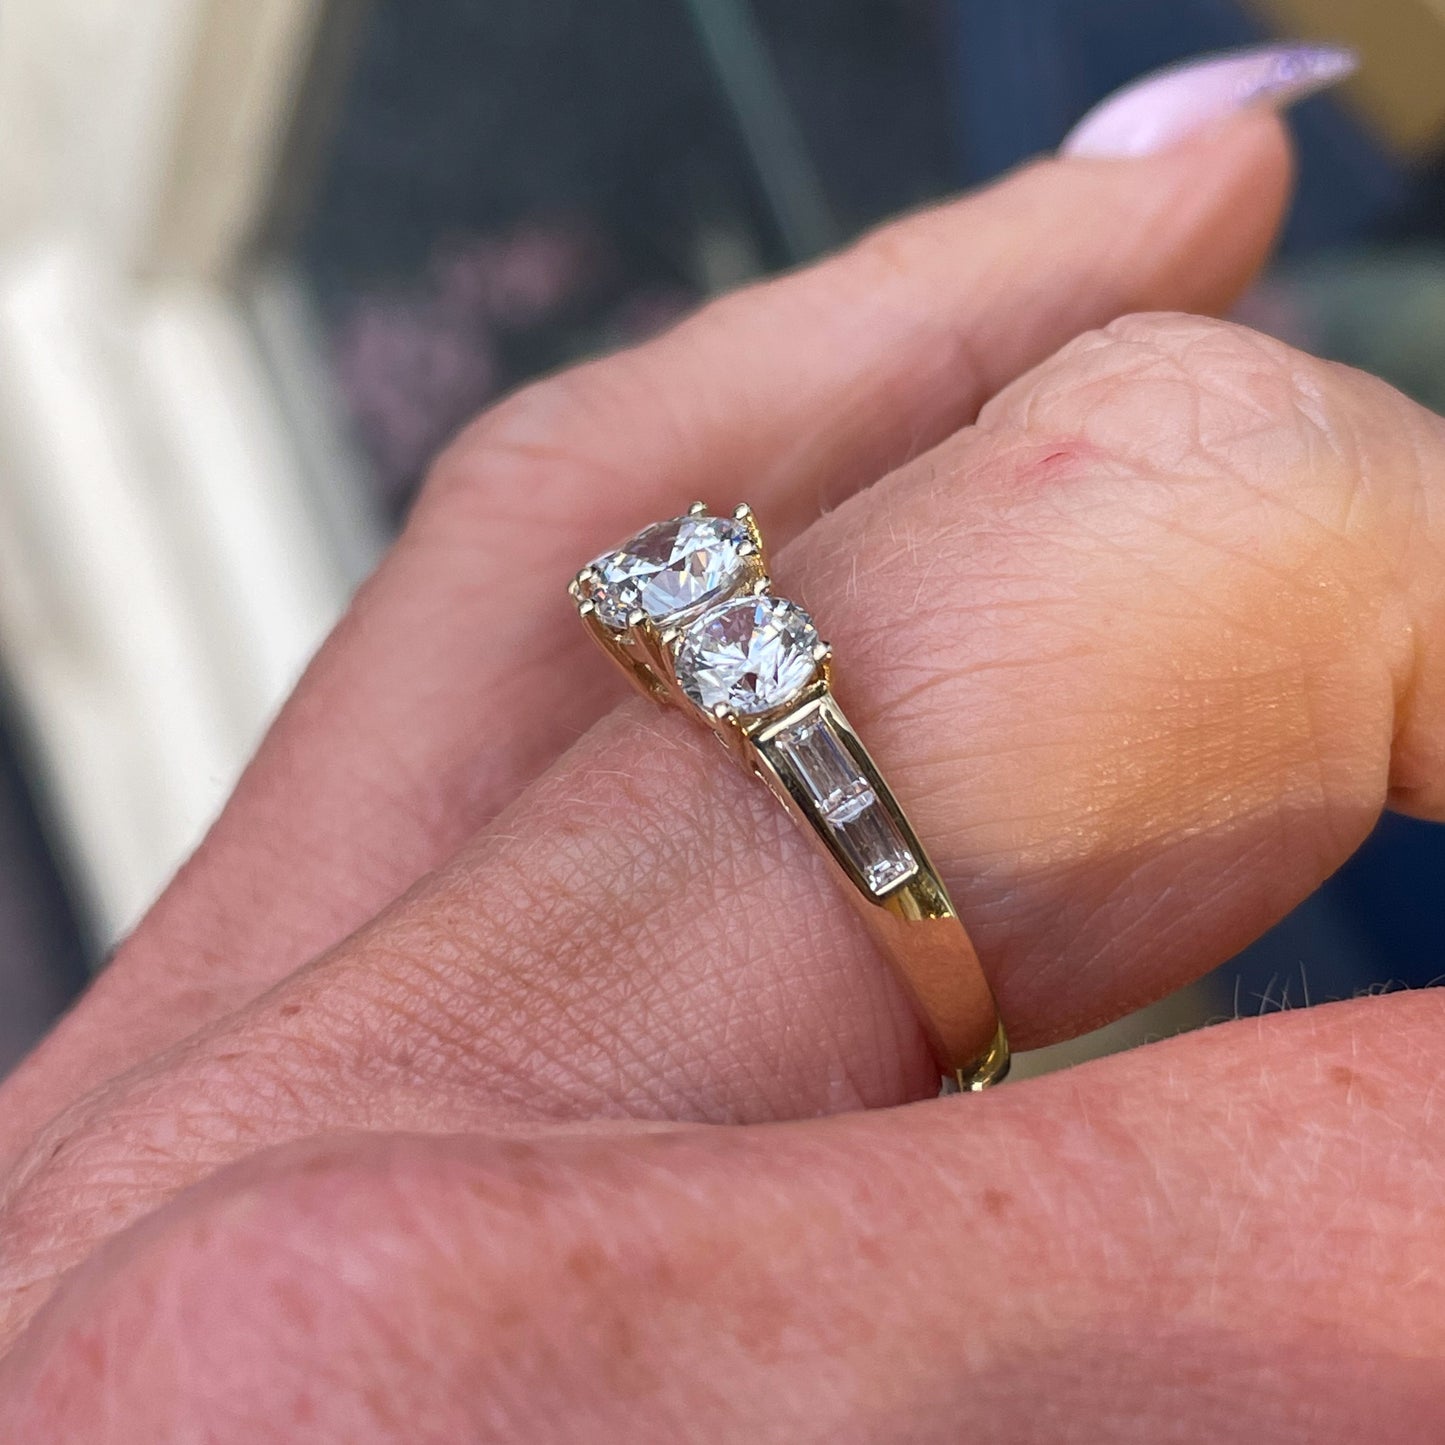 9ct Gold CZ Trilogy Ring with Baguettes - John Ross Jewellers